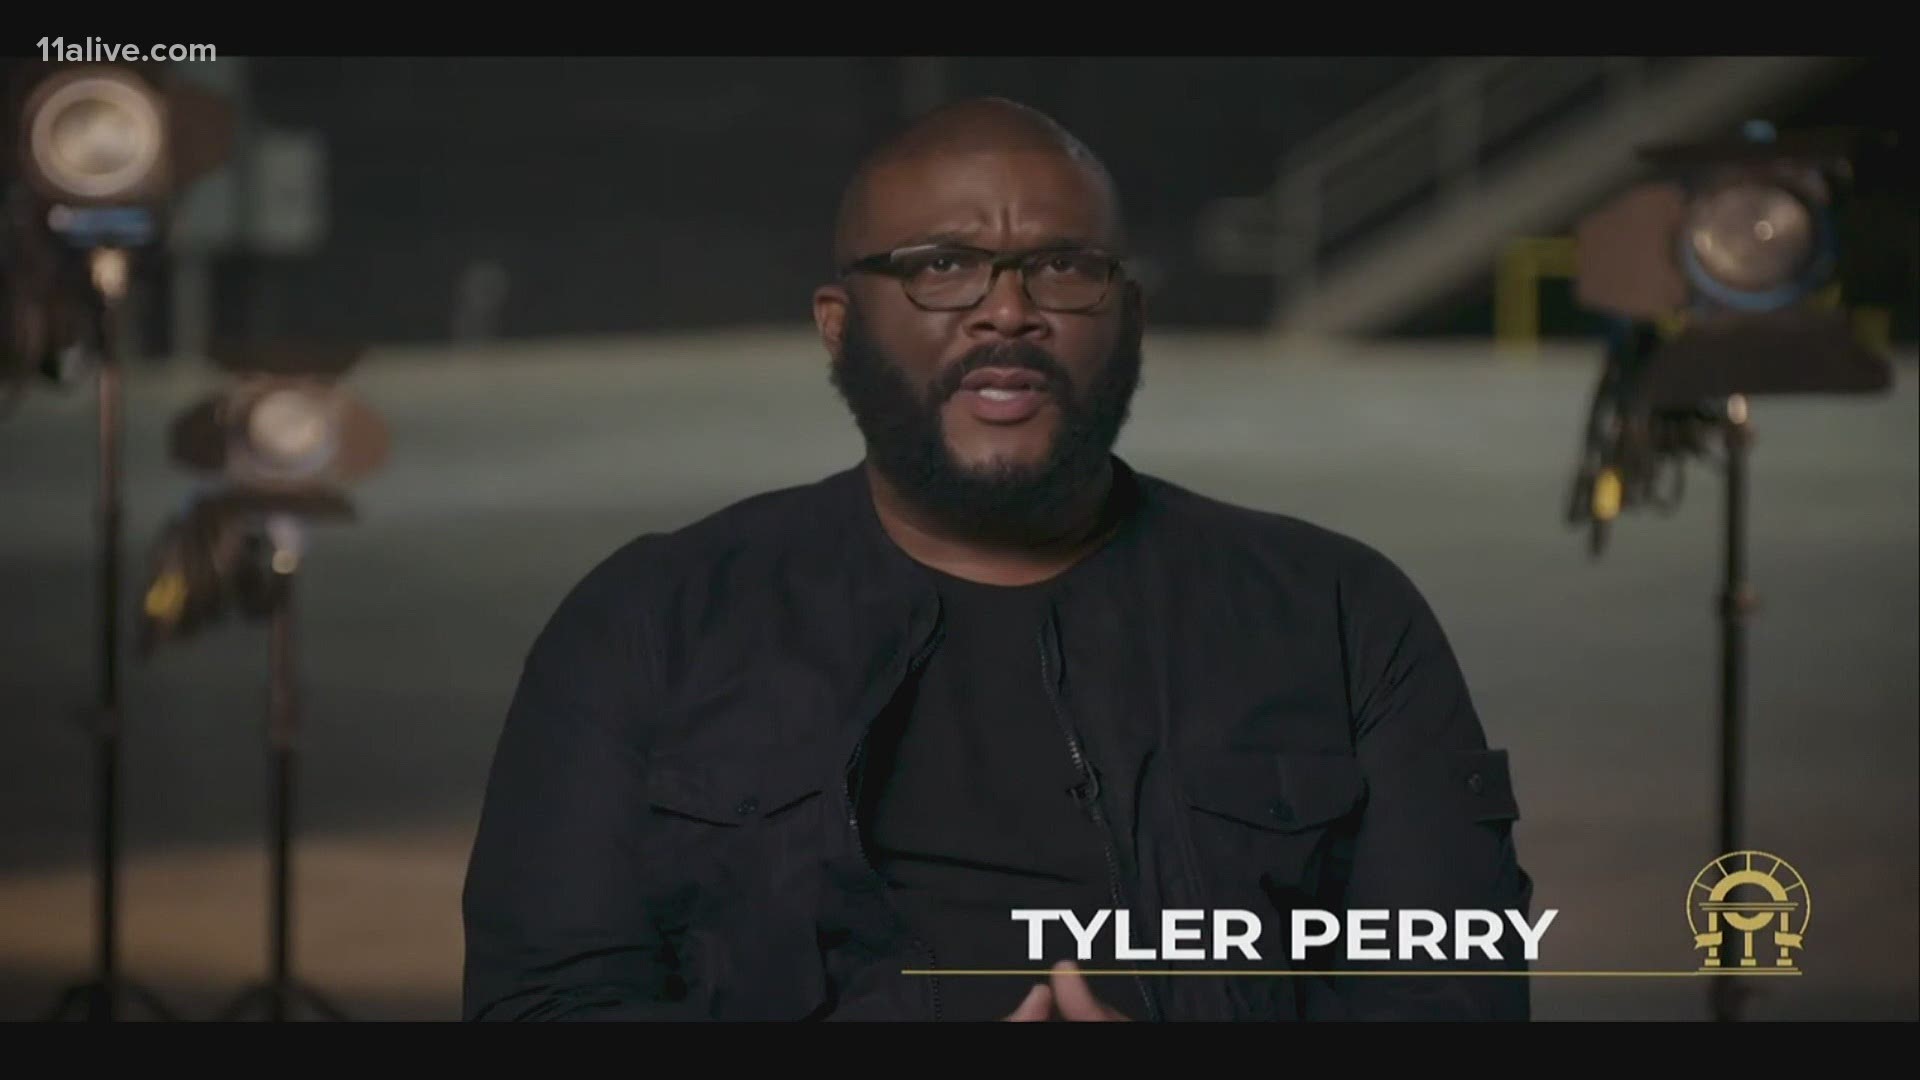 Media mogul Tyler Perry has partnered with Georgia first lady Marty Kemp on a new video campaign that fights human trafficking in the state.